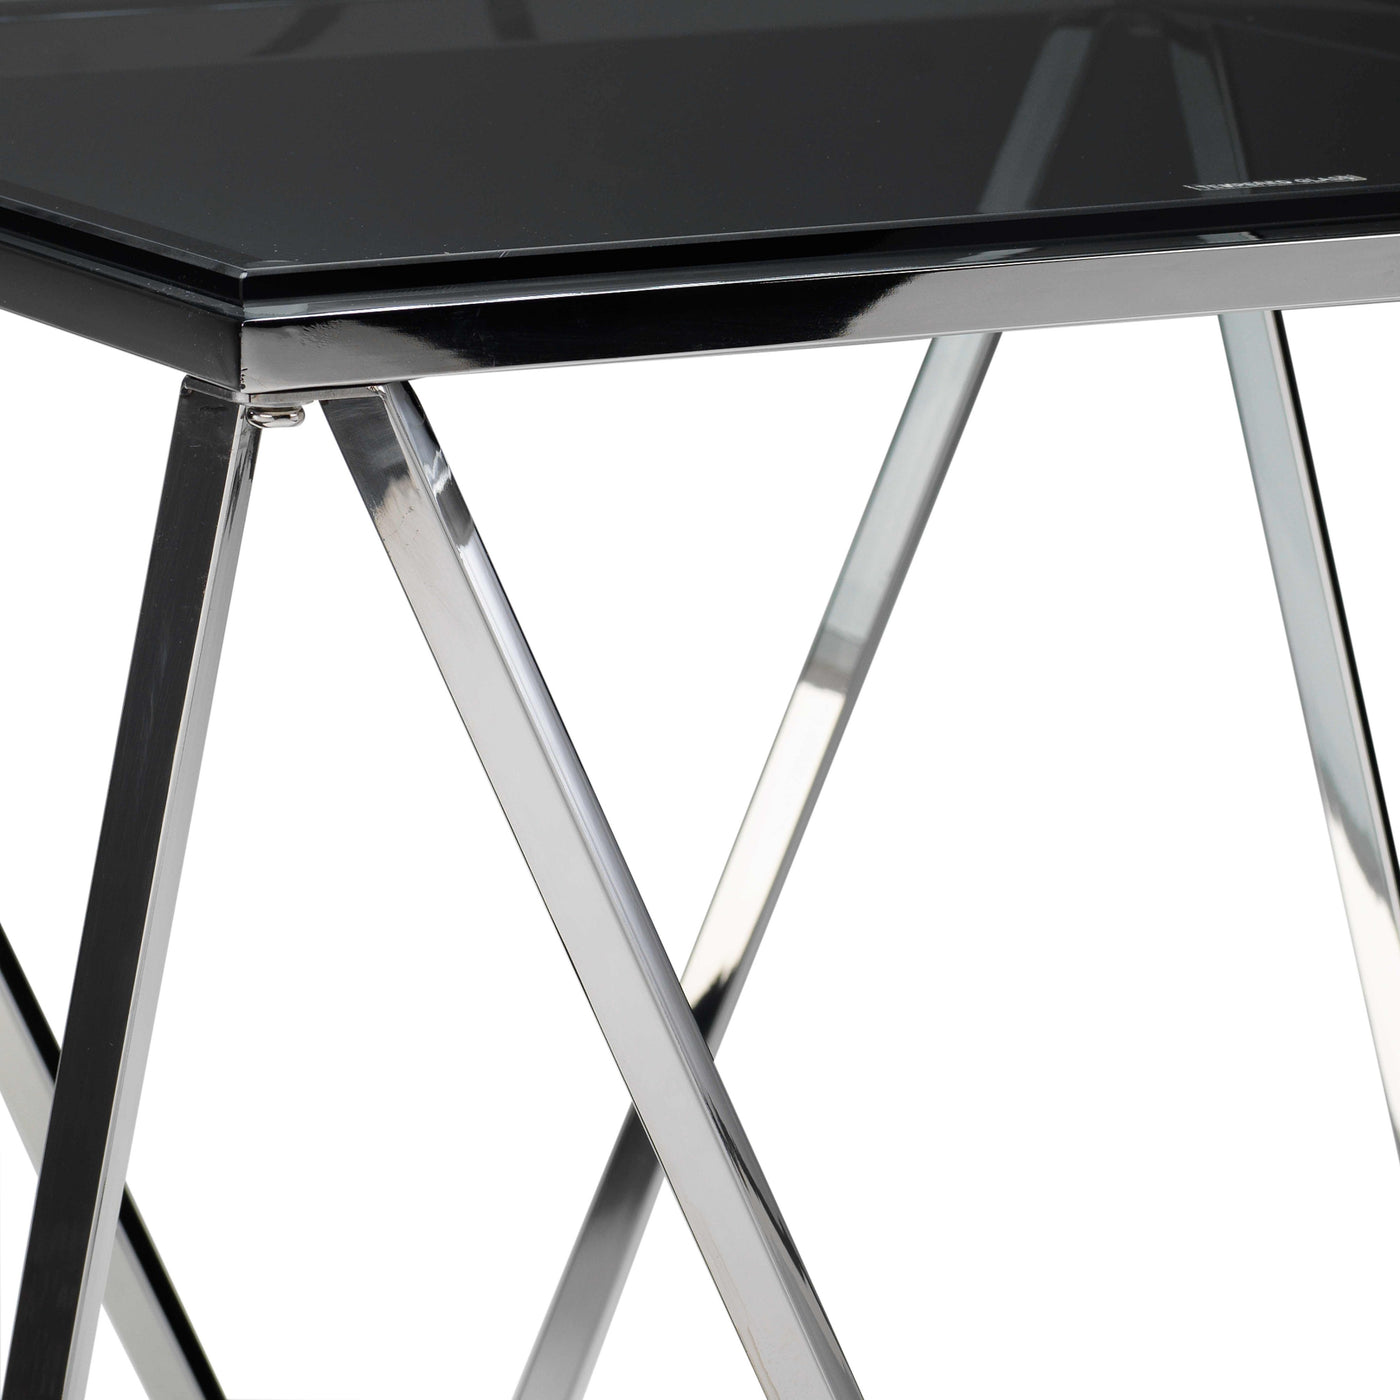 Skylar End Table - Silver and Black